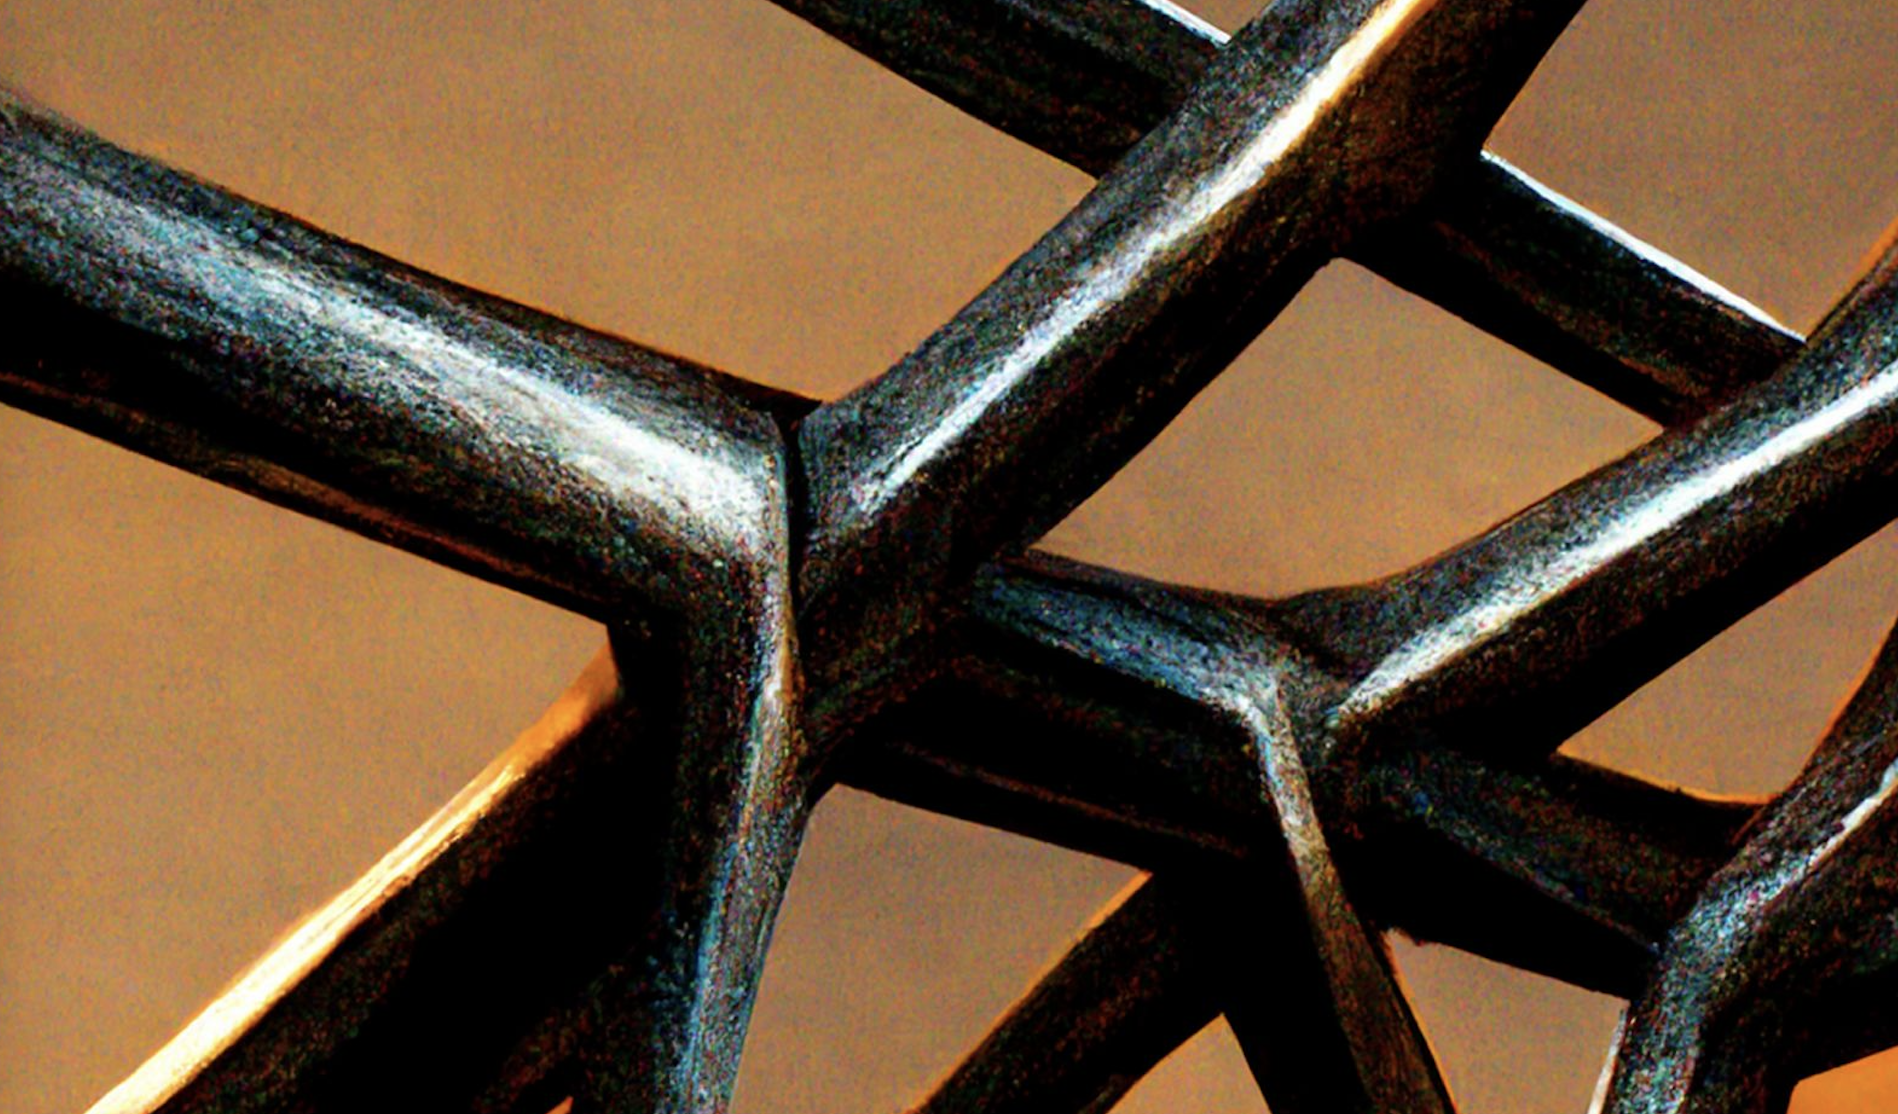 An image of a metal. Yayimages.